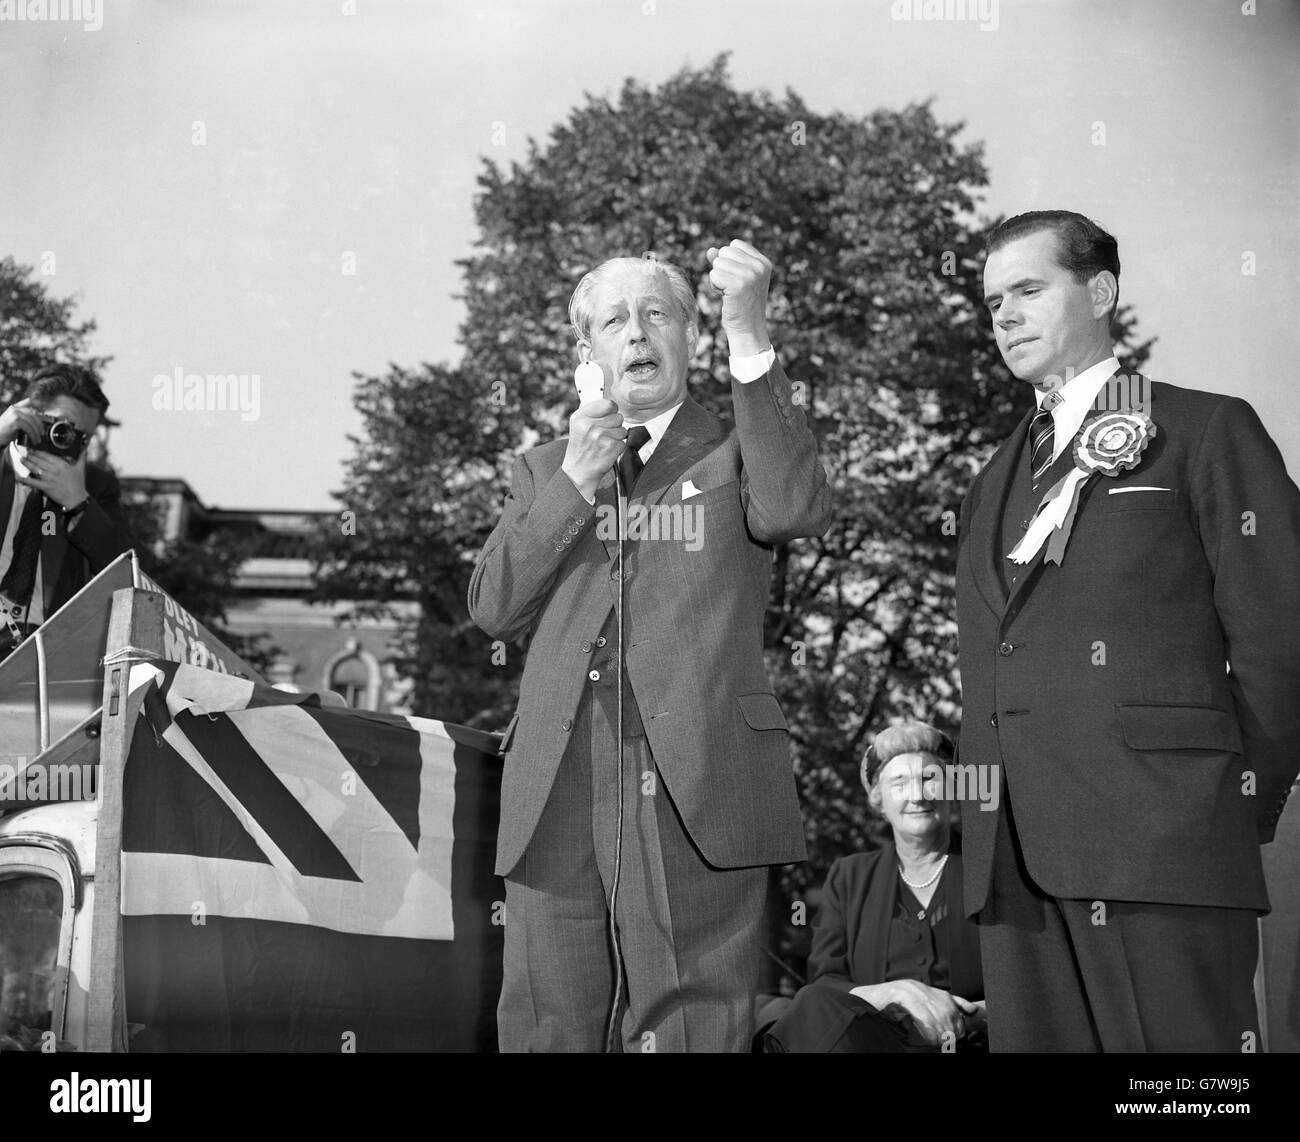 In militant mood, Prime Minister Harold MacMillan addresses a General Election meeting in Acton, West London. During his speech, the Premier refereed to the meetings between Russia's Krushchev and the American President Mr. Eisenhower and asked the crowd 'Do you think Mr. Krushchev and President Eisenhower would have been promoting and discussing together at Camp David last week if i had not decided to break the ice in Moscow?'. Stock Photo